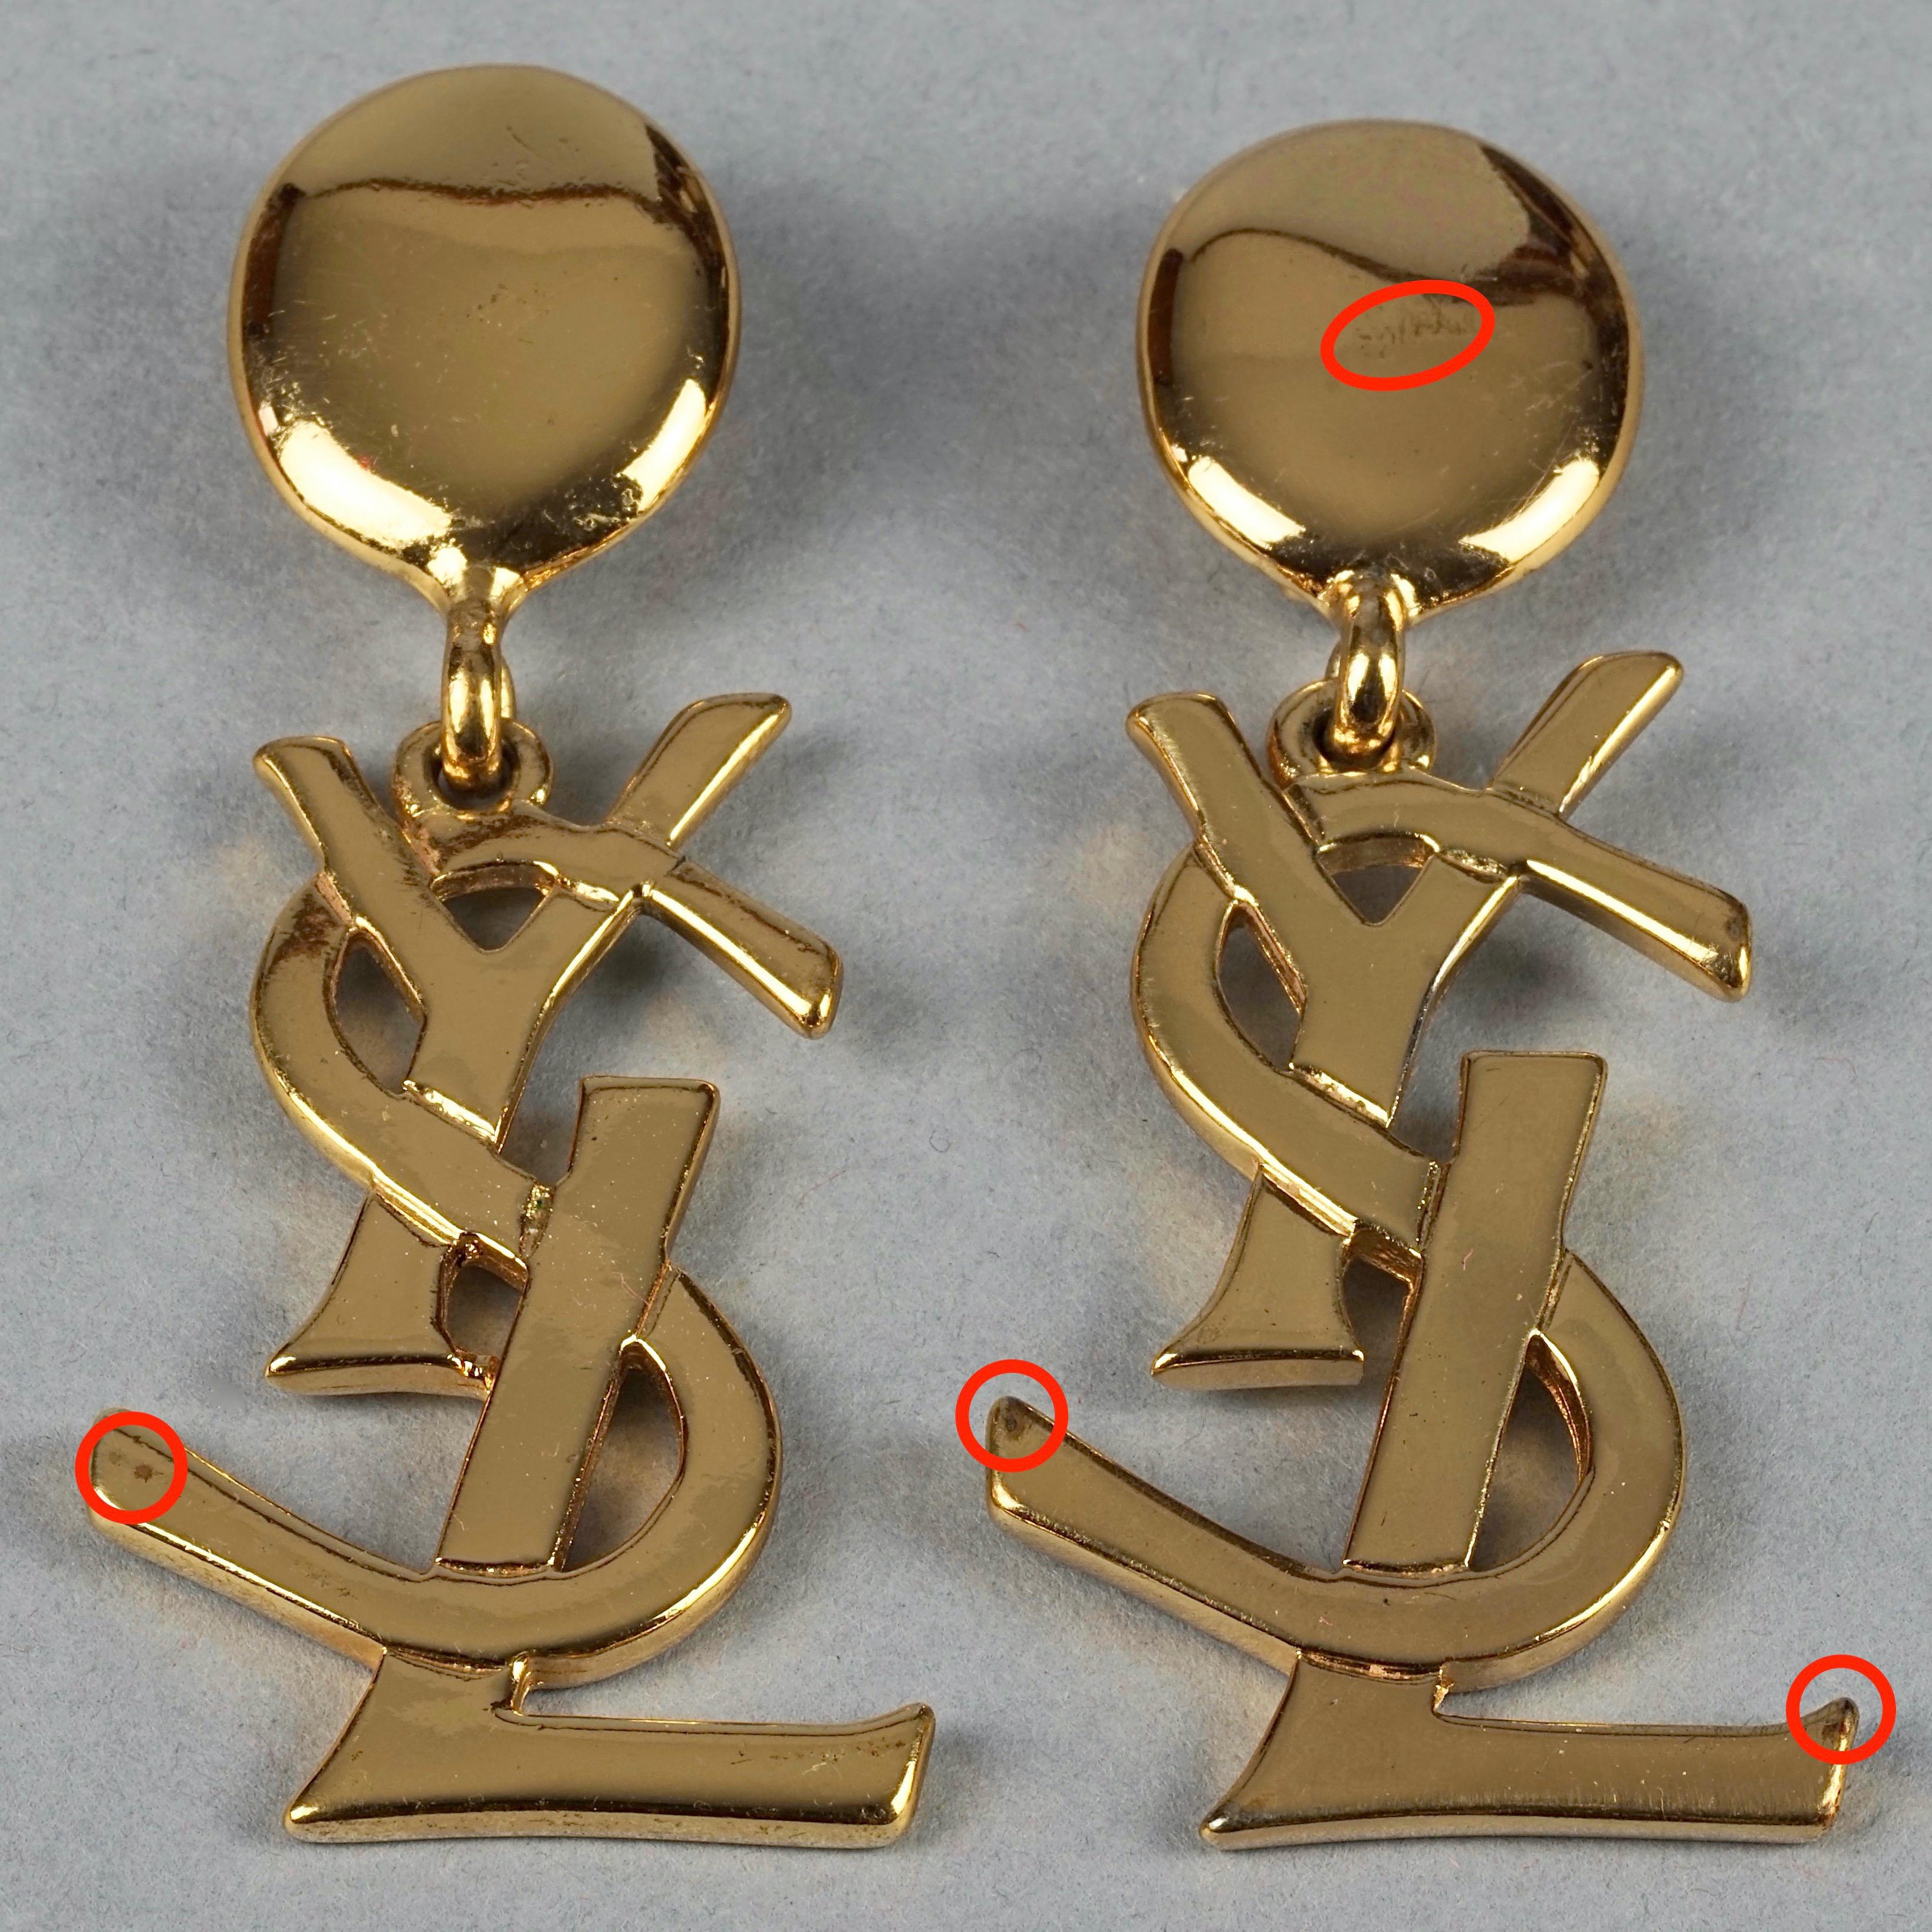 Vintage YVES SAINT LAURENT Ysl Iconic Logo Drop Earrings - Sex and The City 4